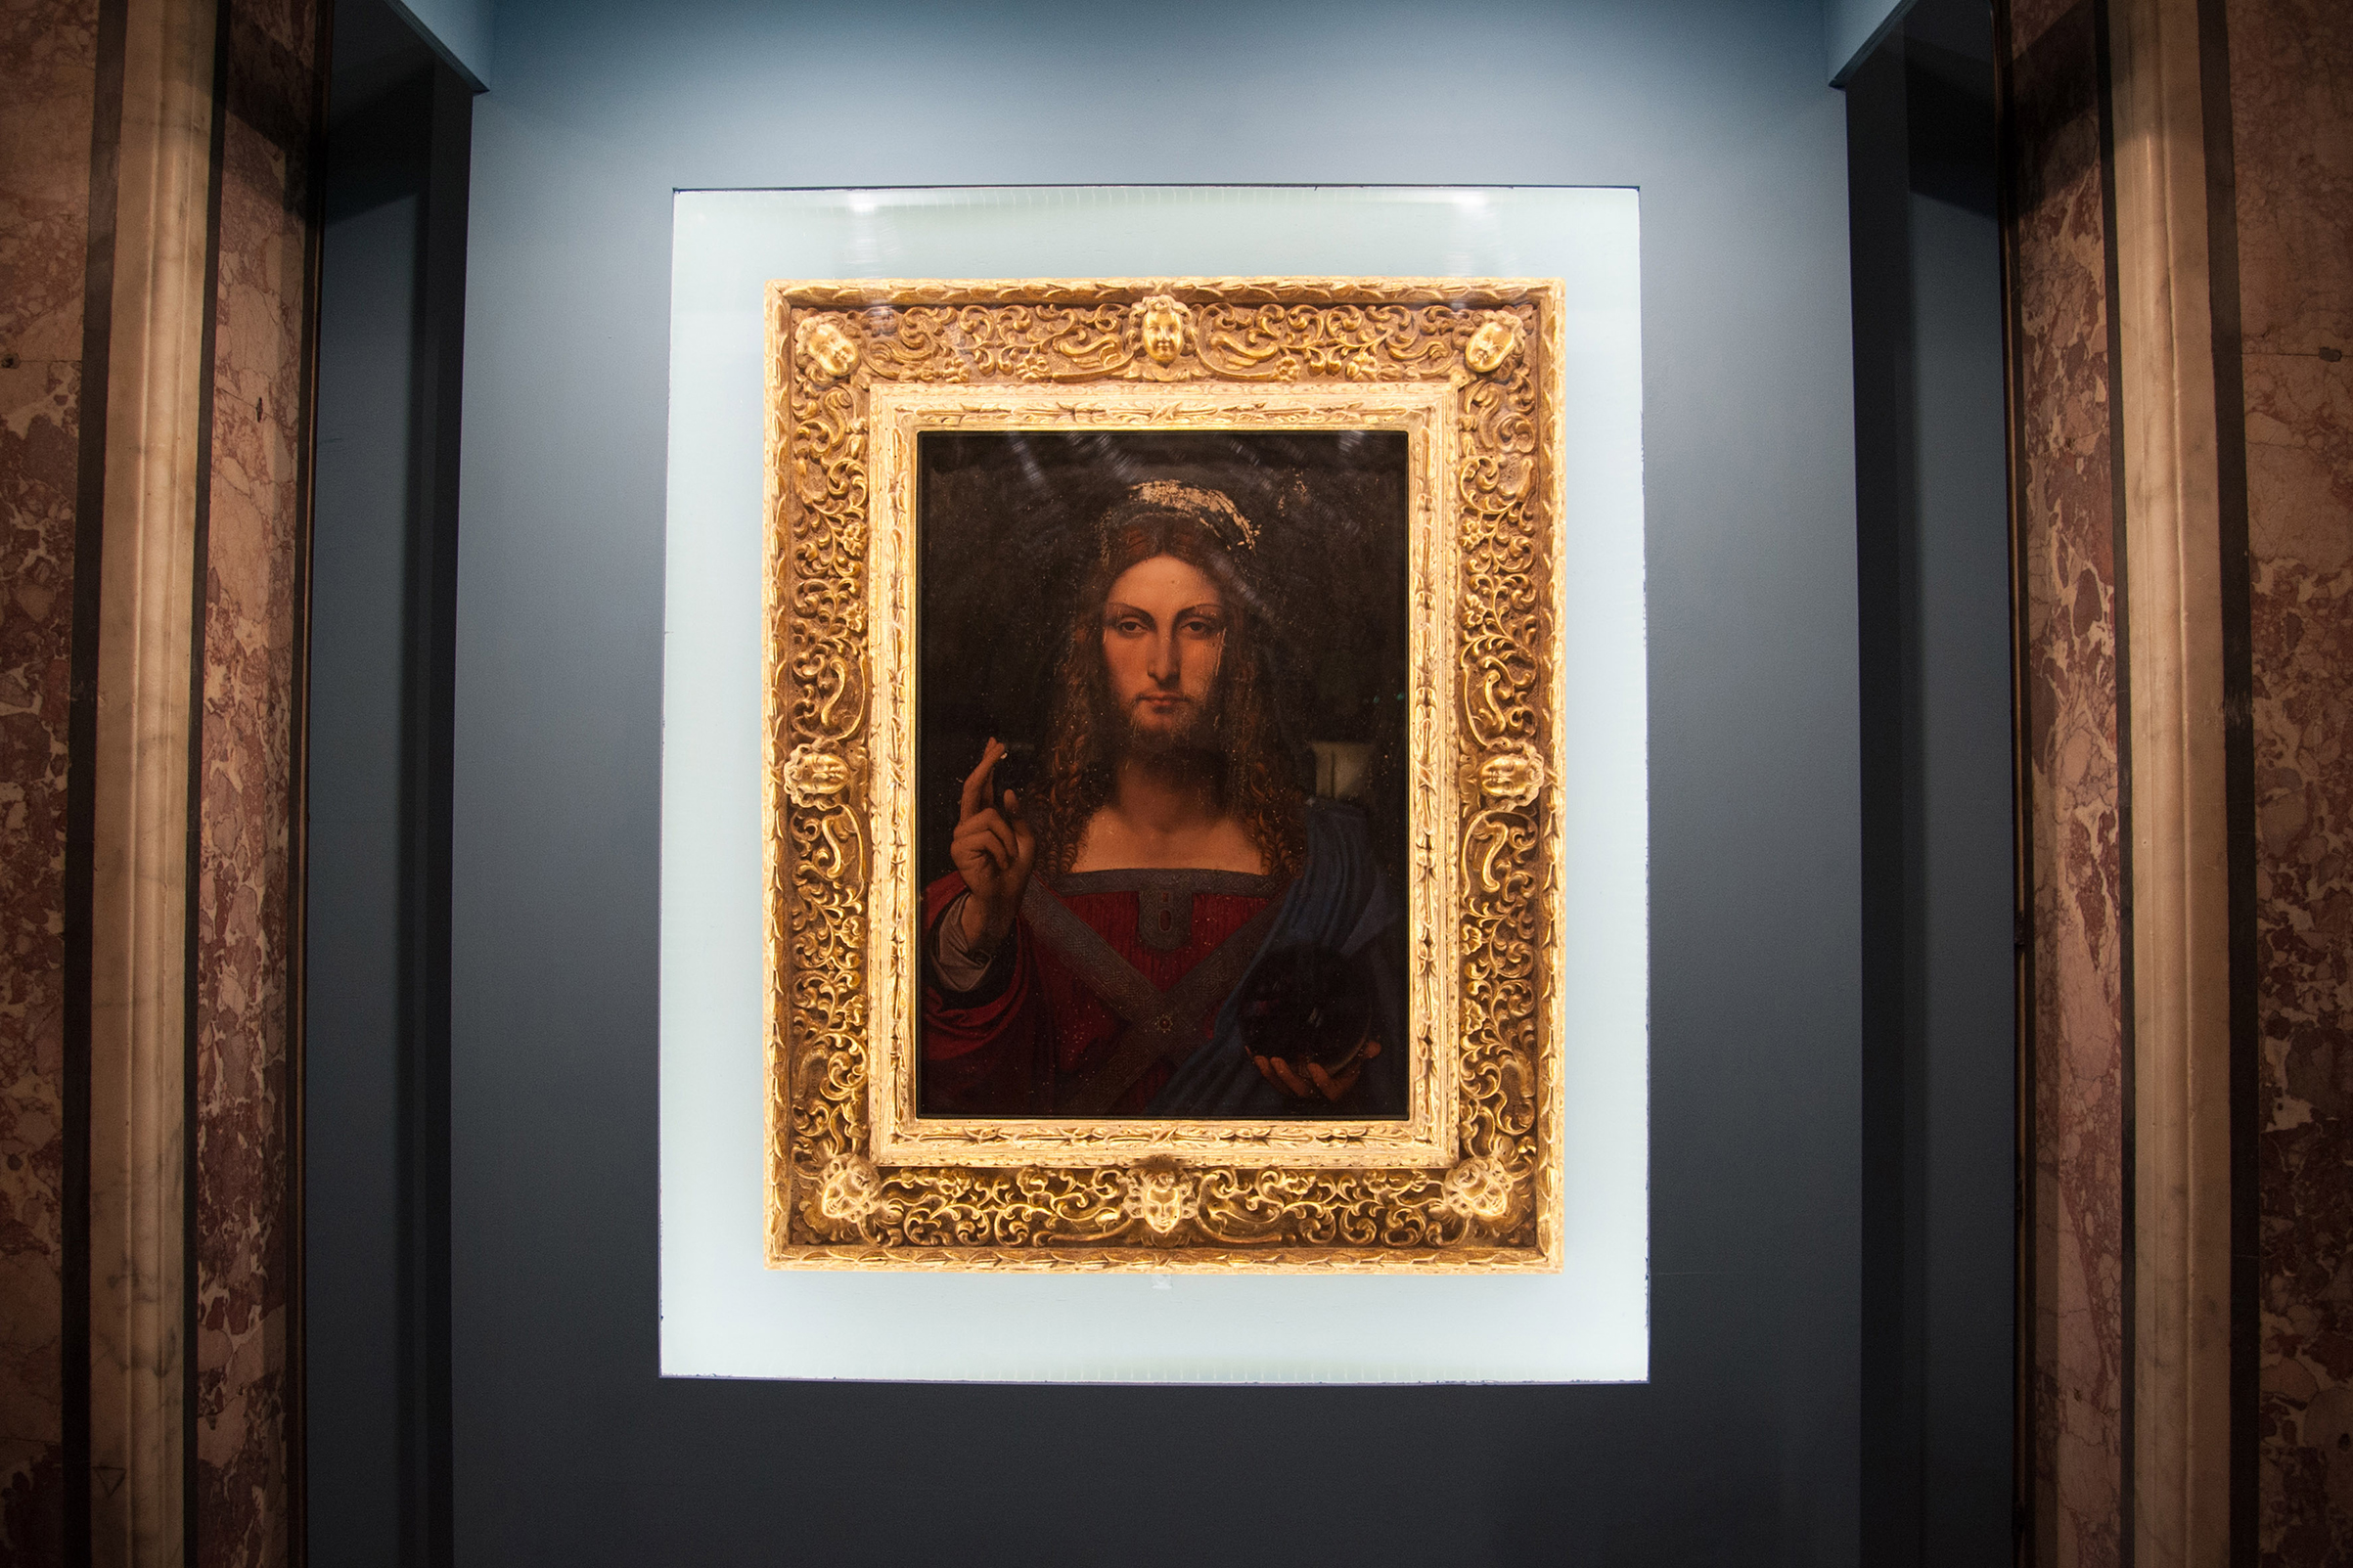 Salvator Mundi  (Savior of the World), the last of Leonardo Da Vinci's works in private hands, sold for $450 million on Nov. 15, 2017. In 1958, before it was proved to be a DaVinci, the same painting changed hands for 45 British pounds.